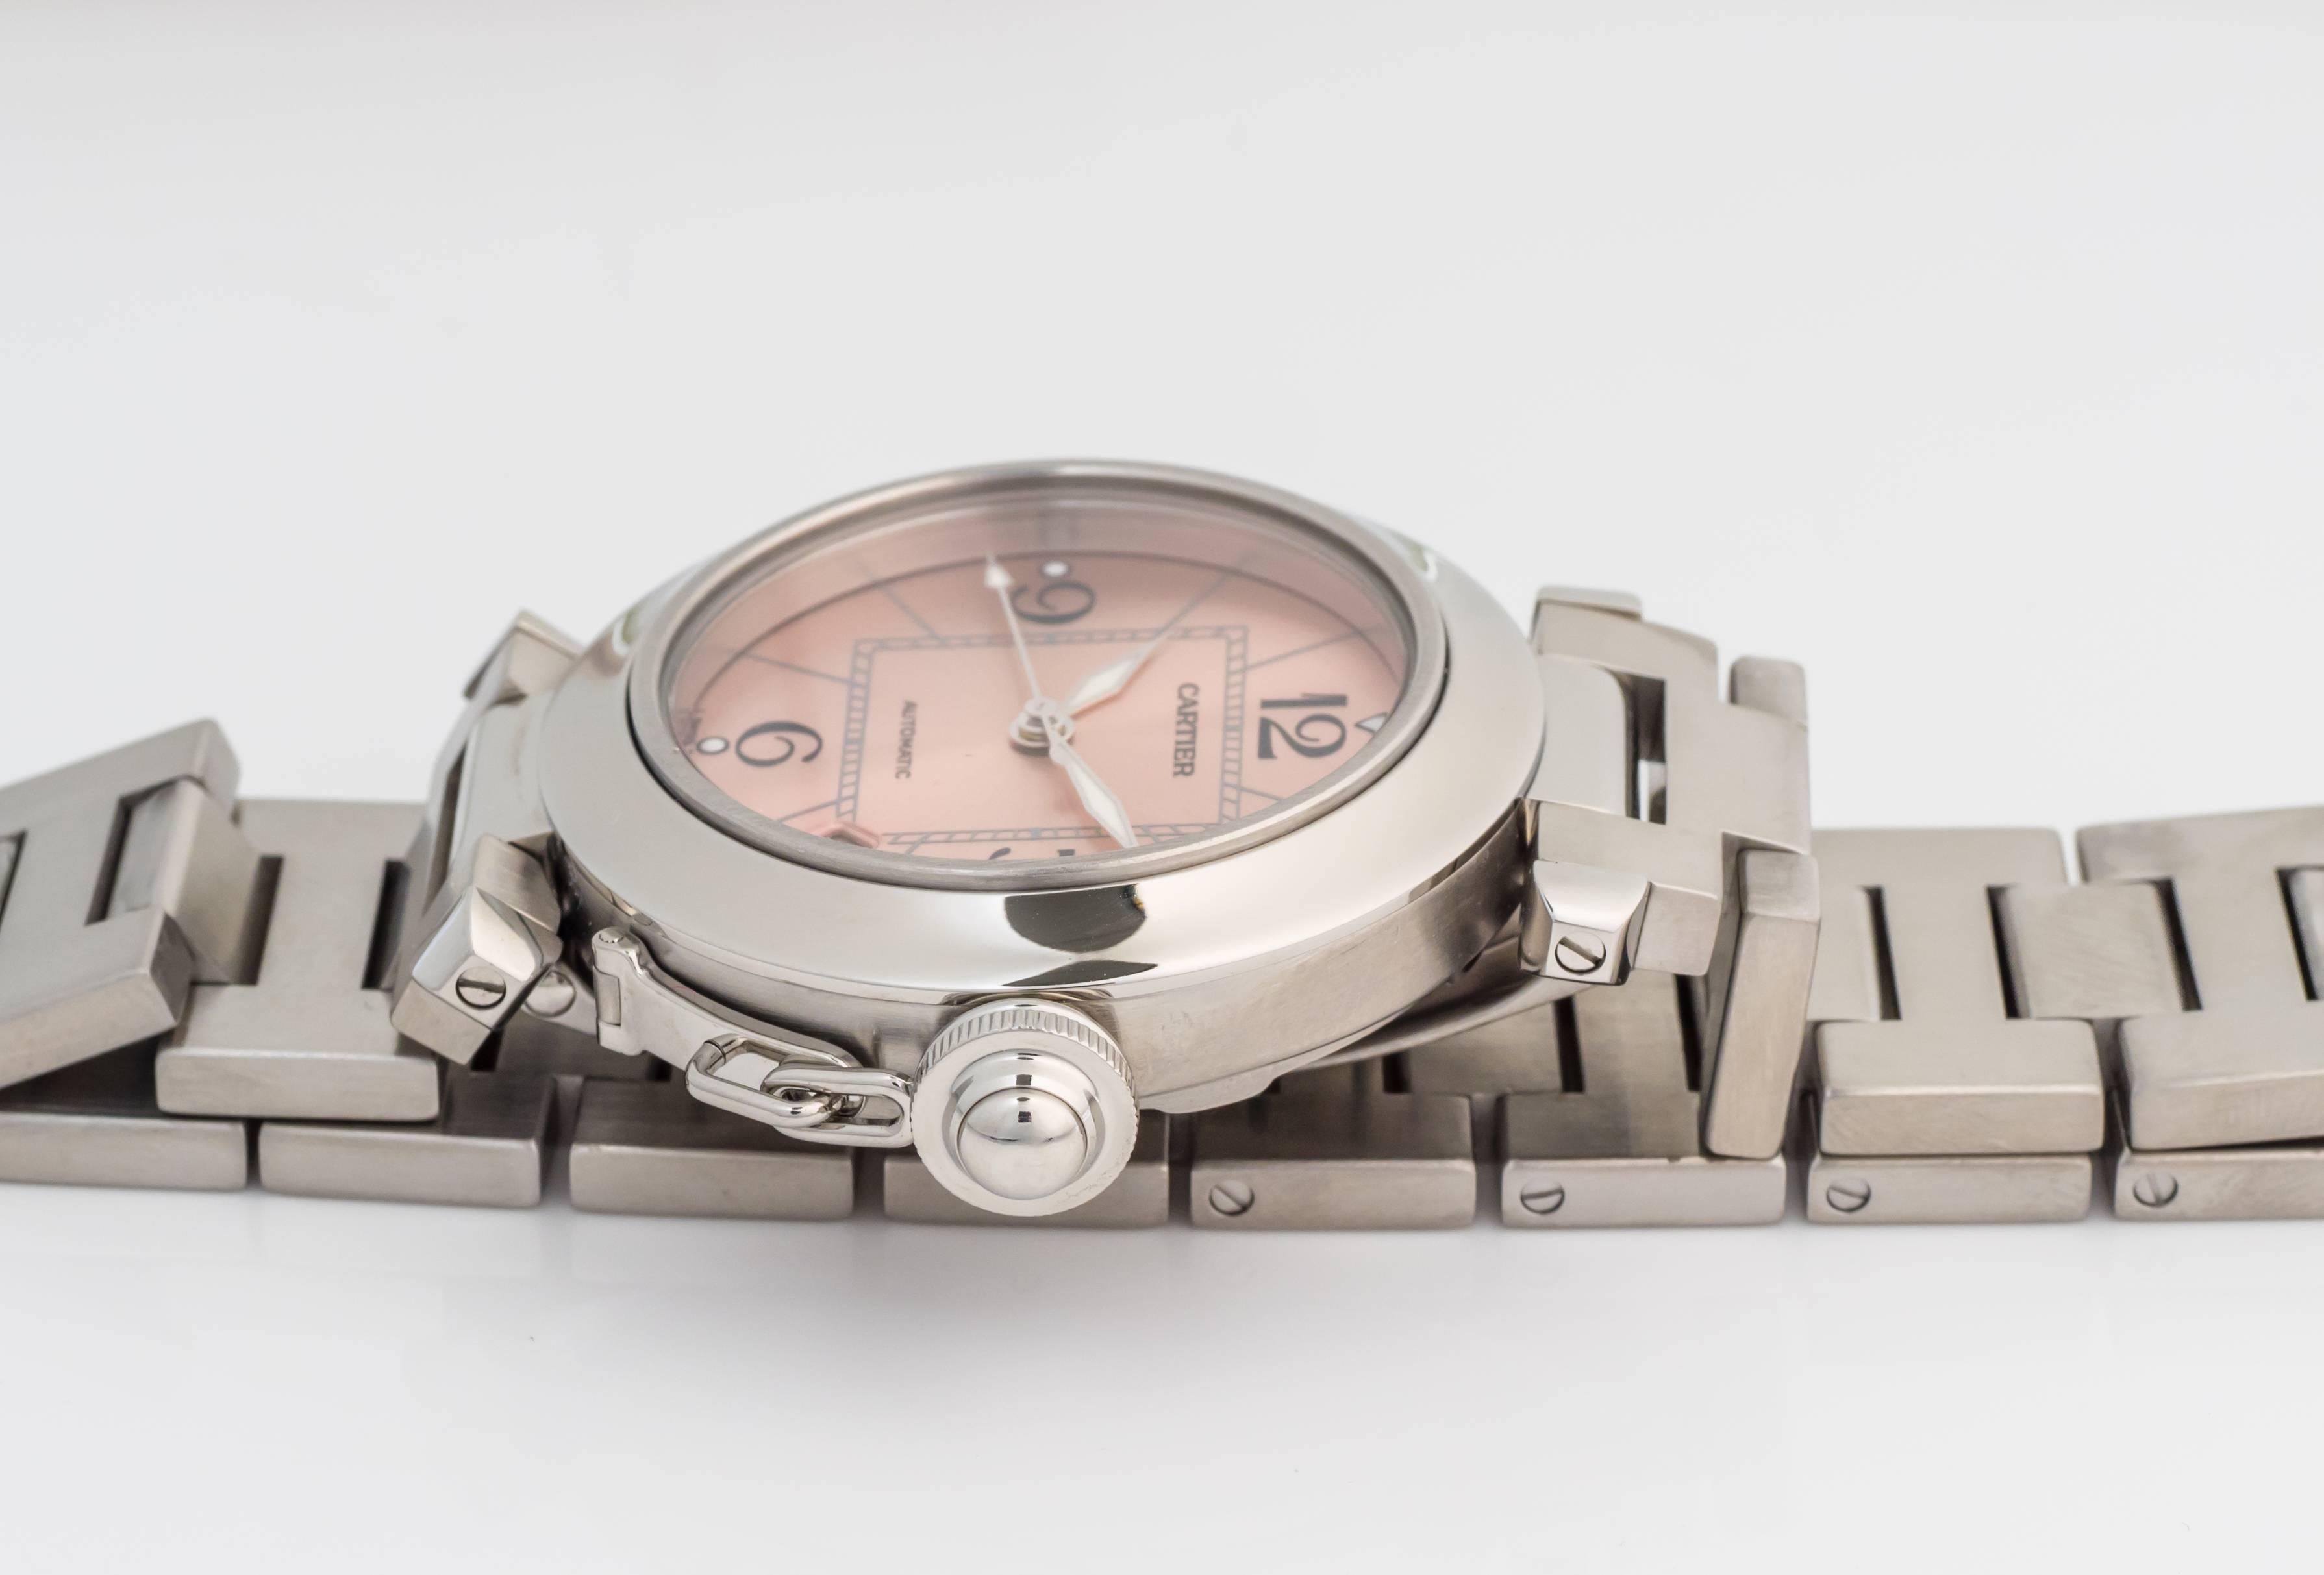 Featured here is a Cartier Pasha in pristine condition. Freshly polished, it features a brushed steel 35mm case. There are 8 screws in case back and watch has been recently serviced and tested to be water-resistant. It features a gorgeous salmon